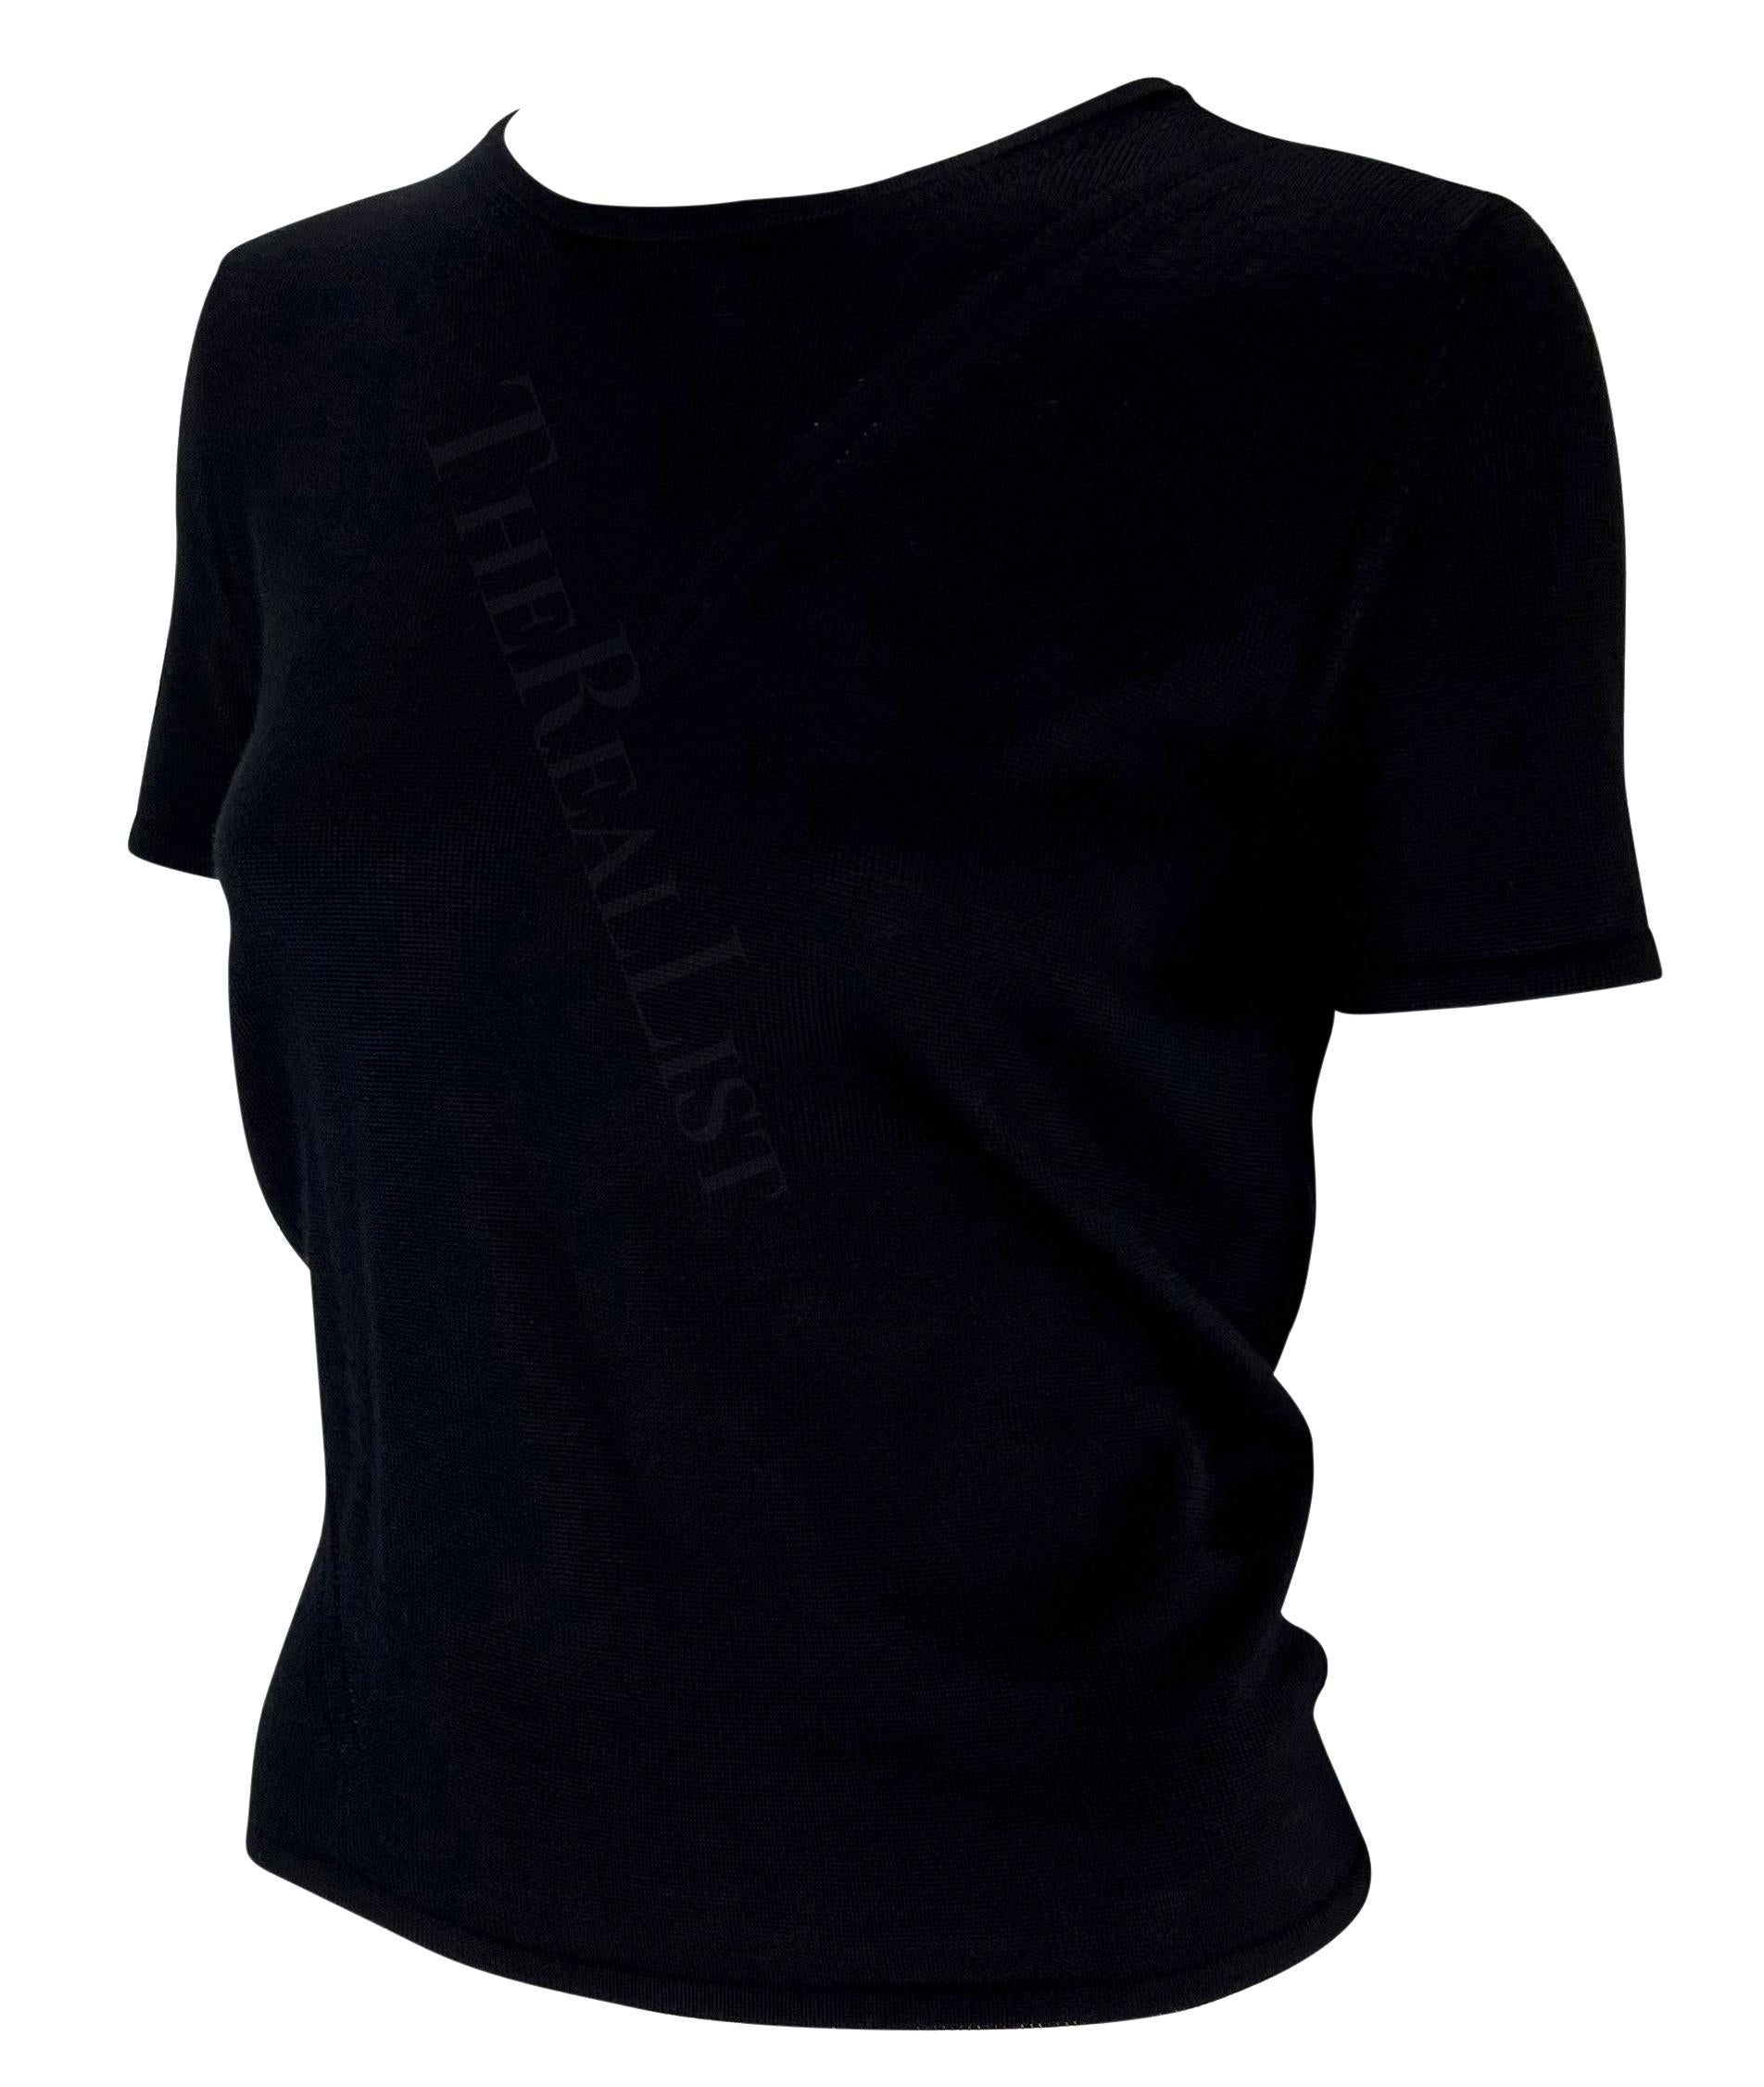 S/S 1997 Gucci by Tom Ford Open Back Black Stretch Knit Short-Sleeve Top en vente 1